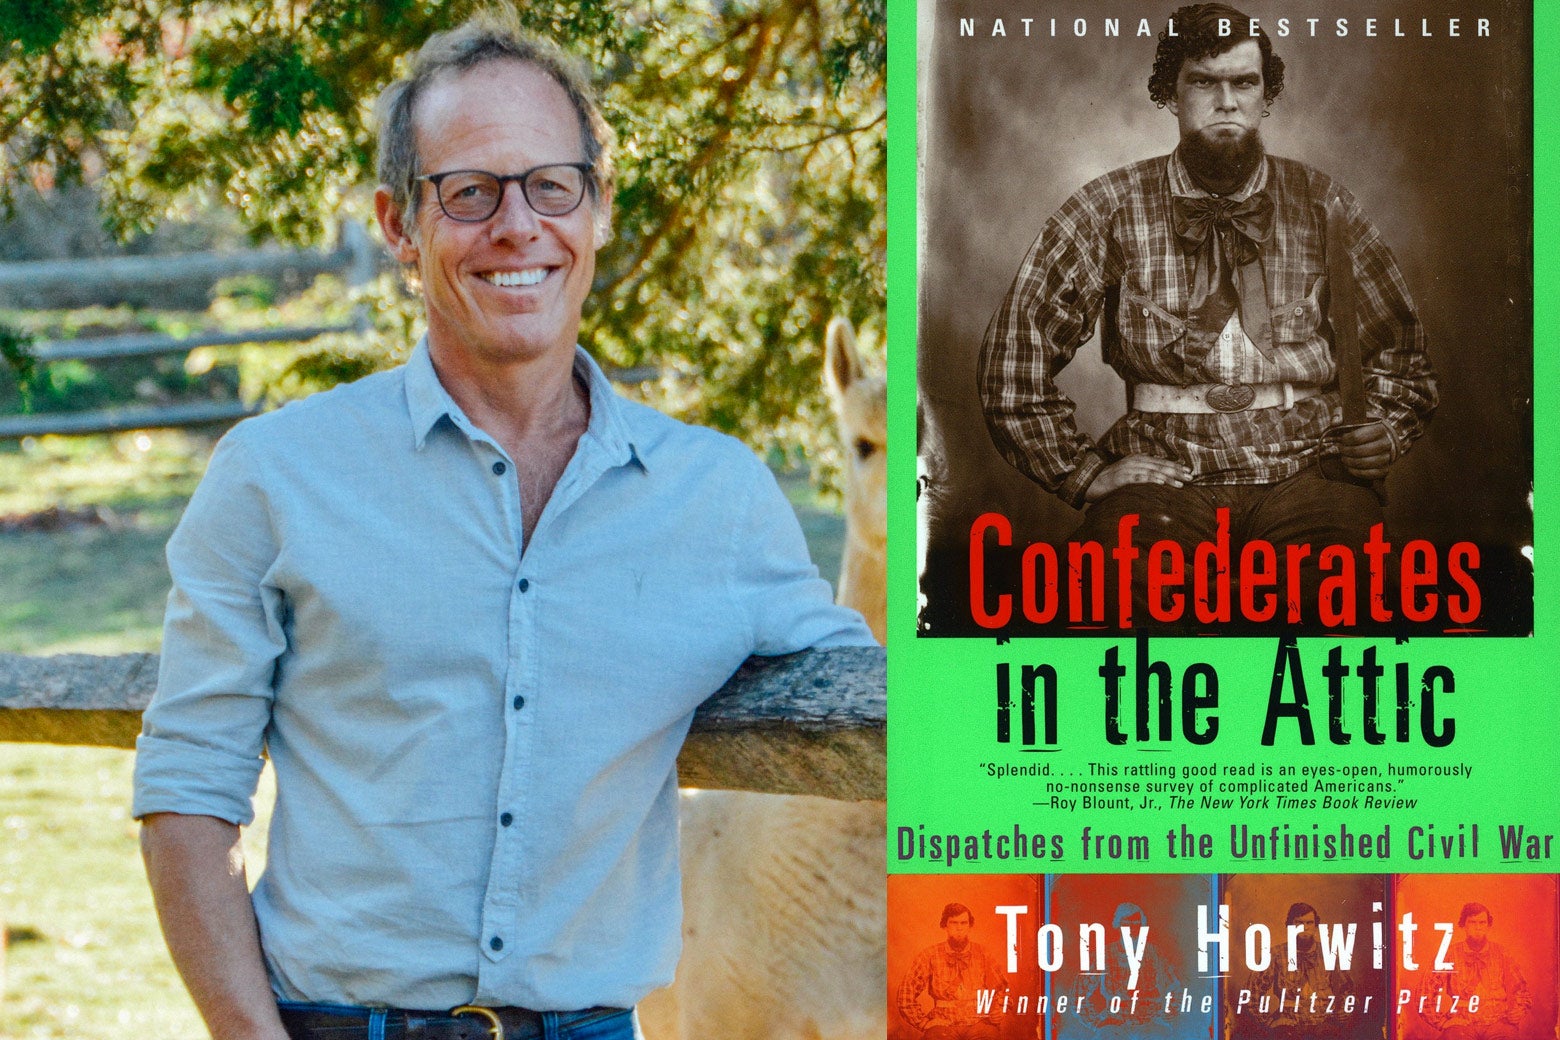 Tony Horwitz and the cover of Confederates in the Attic.